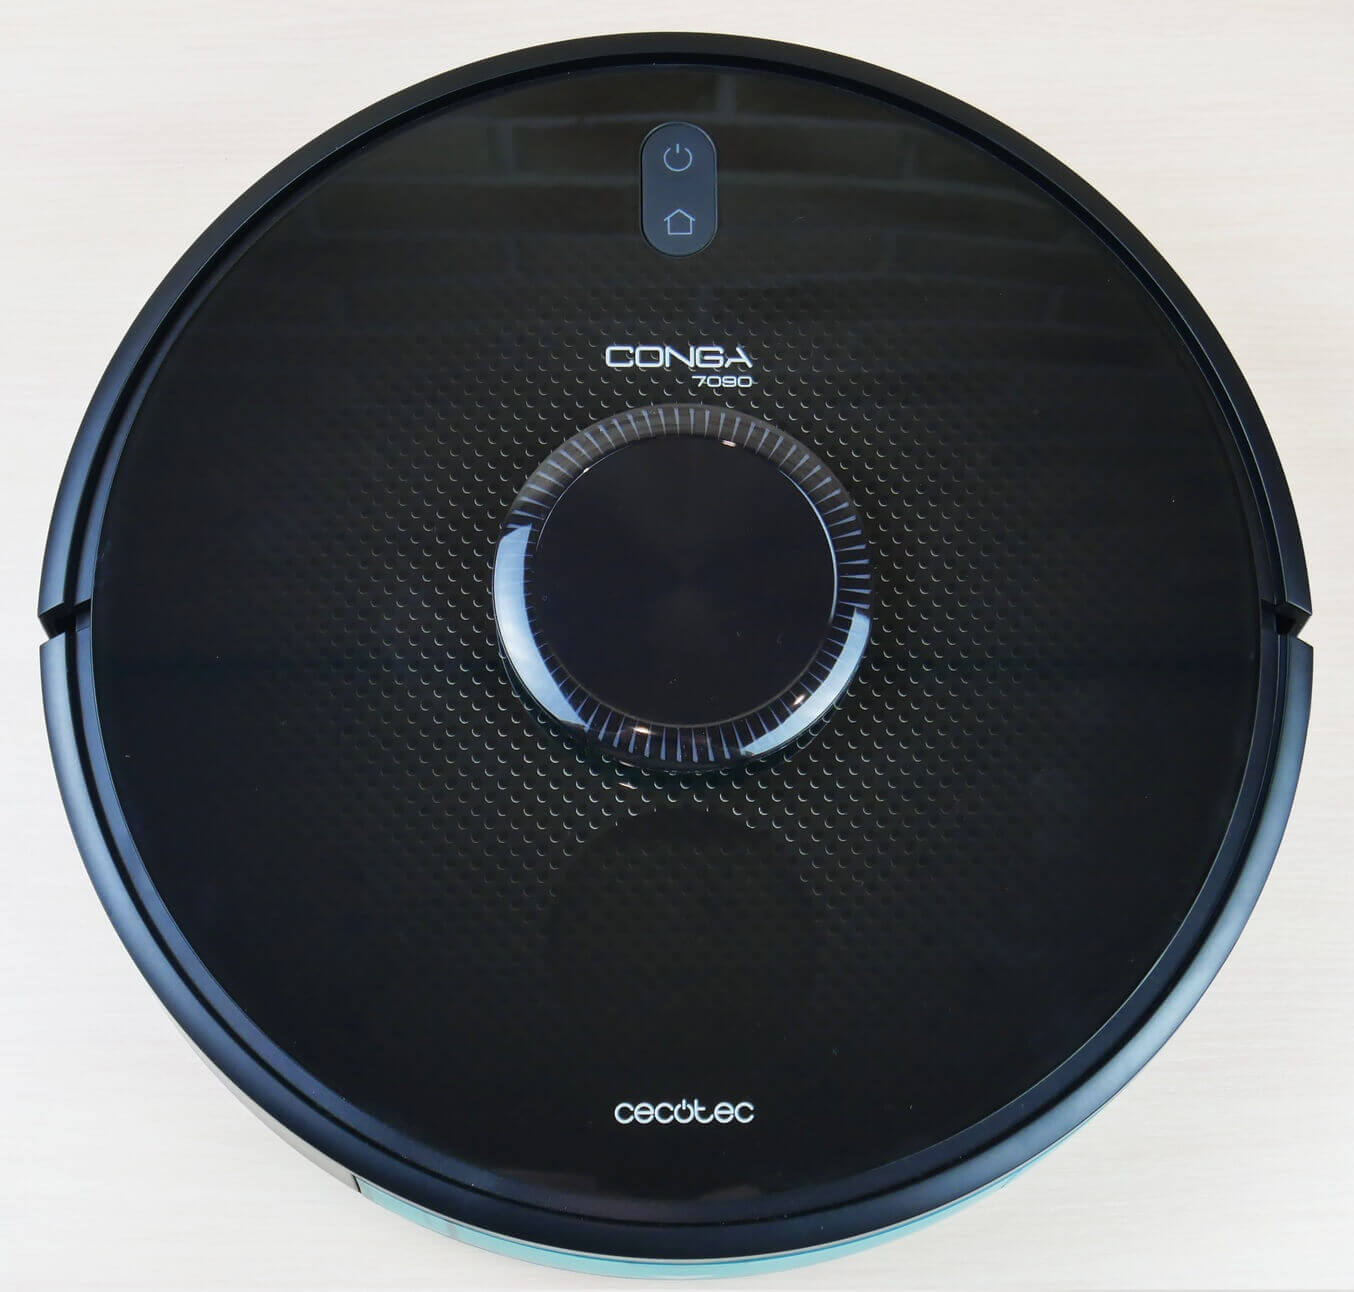 Cecotec Conga 7090 IA Review & Test: is it worth buying?!